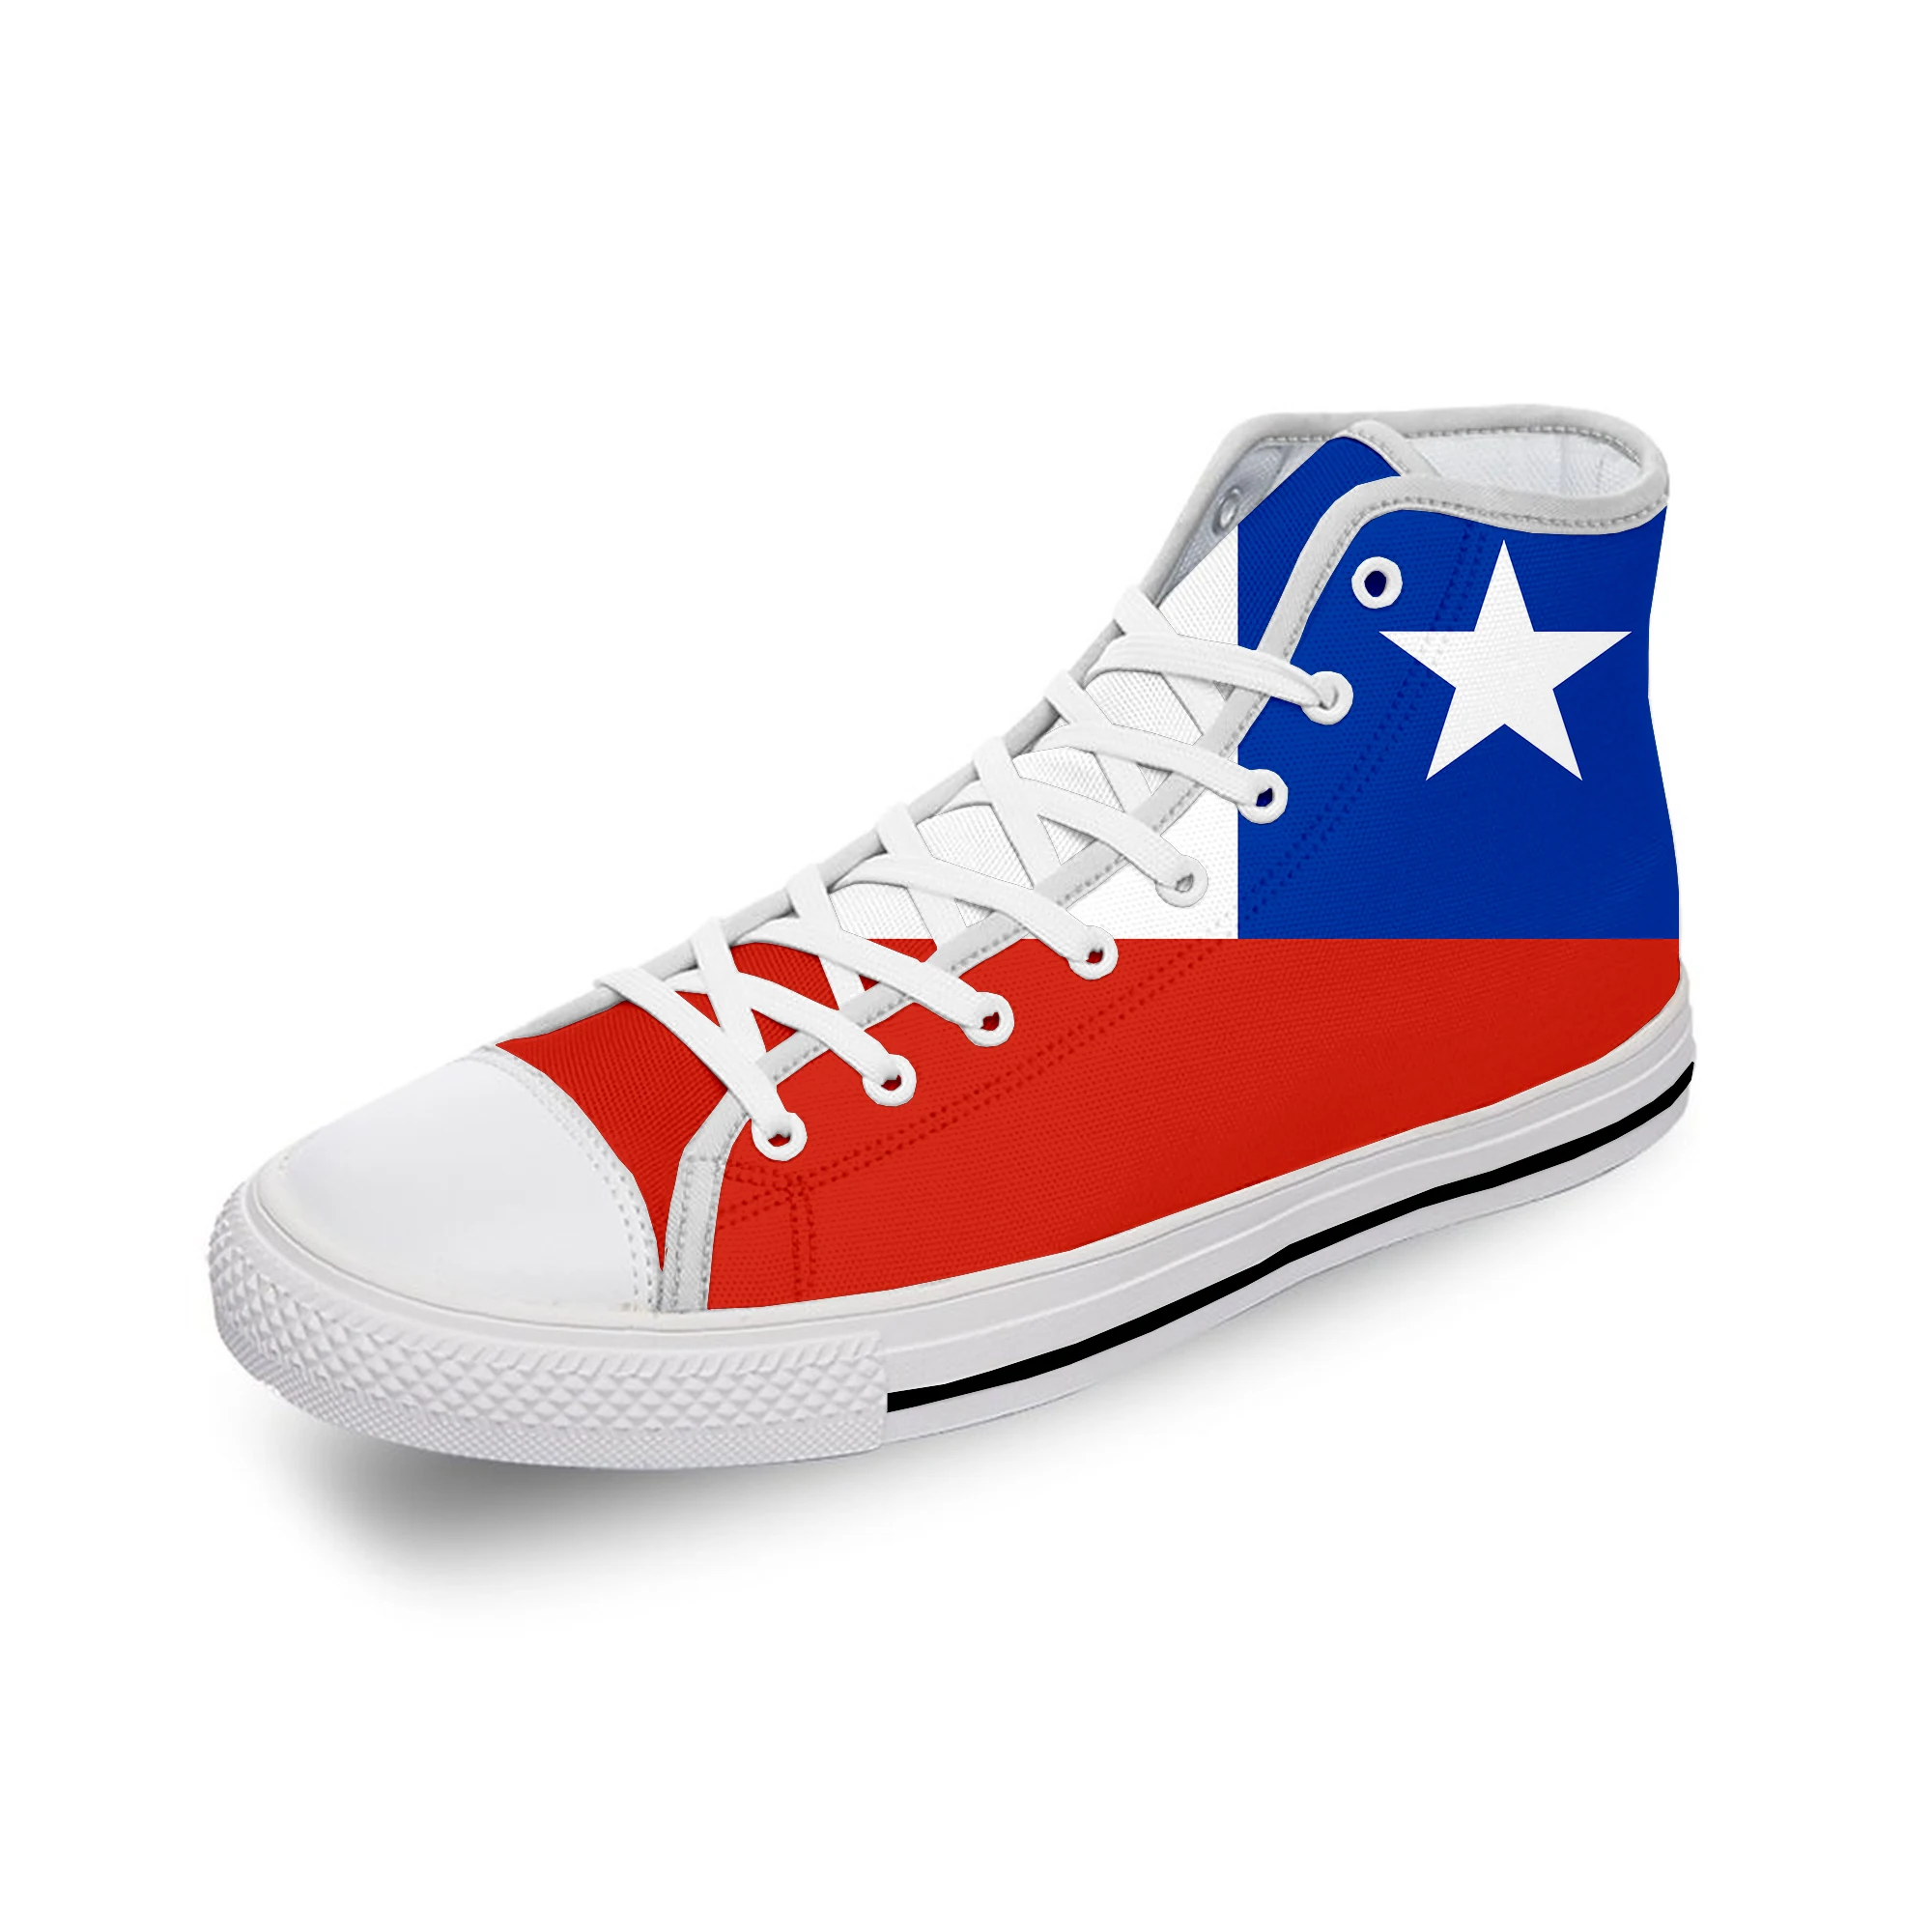 Chilean Flag Chile Patriotic Cool White Cloth Fashion 3D Print High Top Canvas Shoes Men Women Lightweight Breathable Sneakers